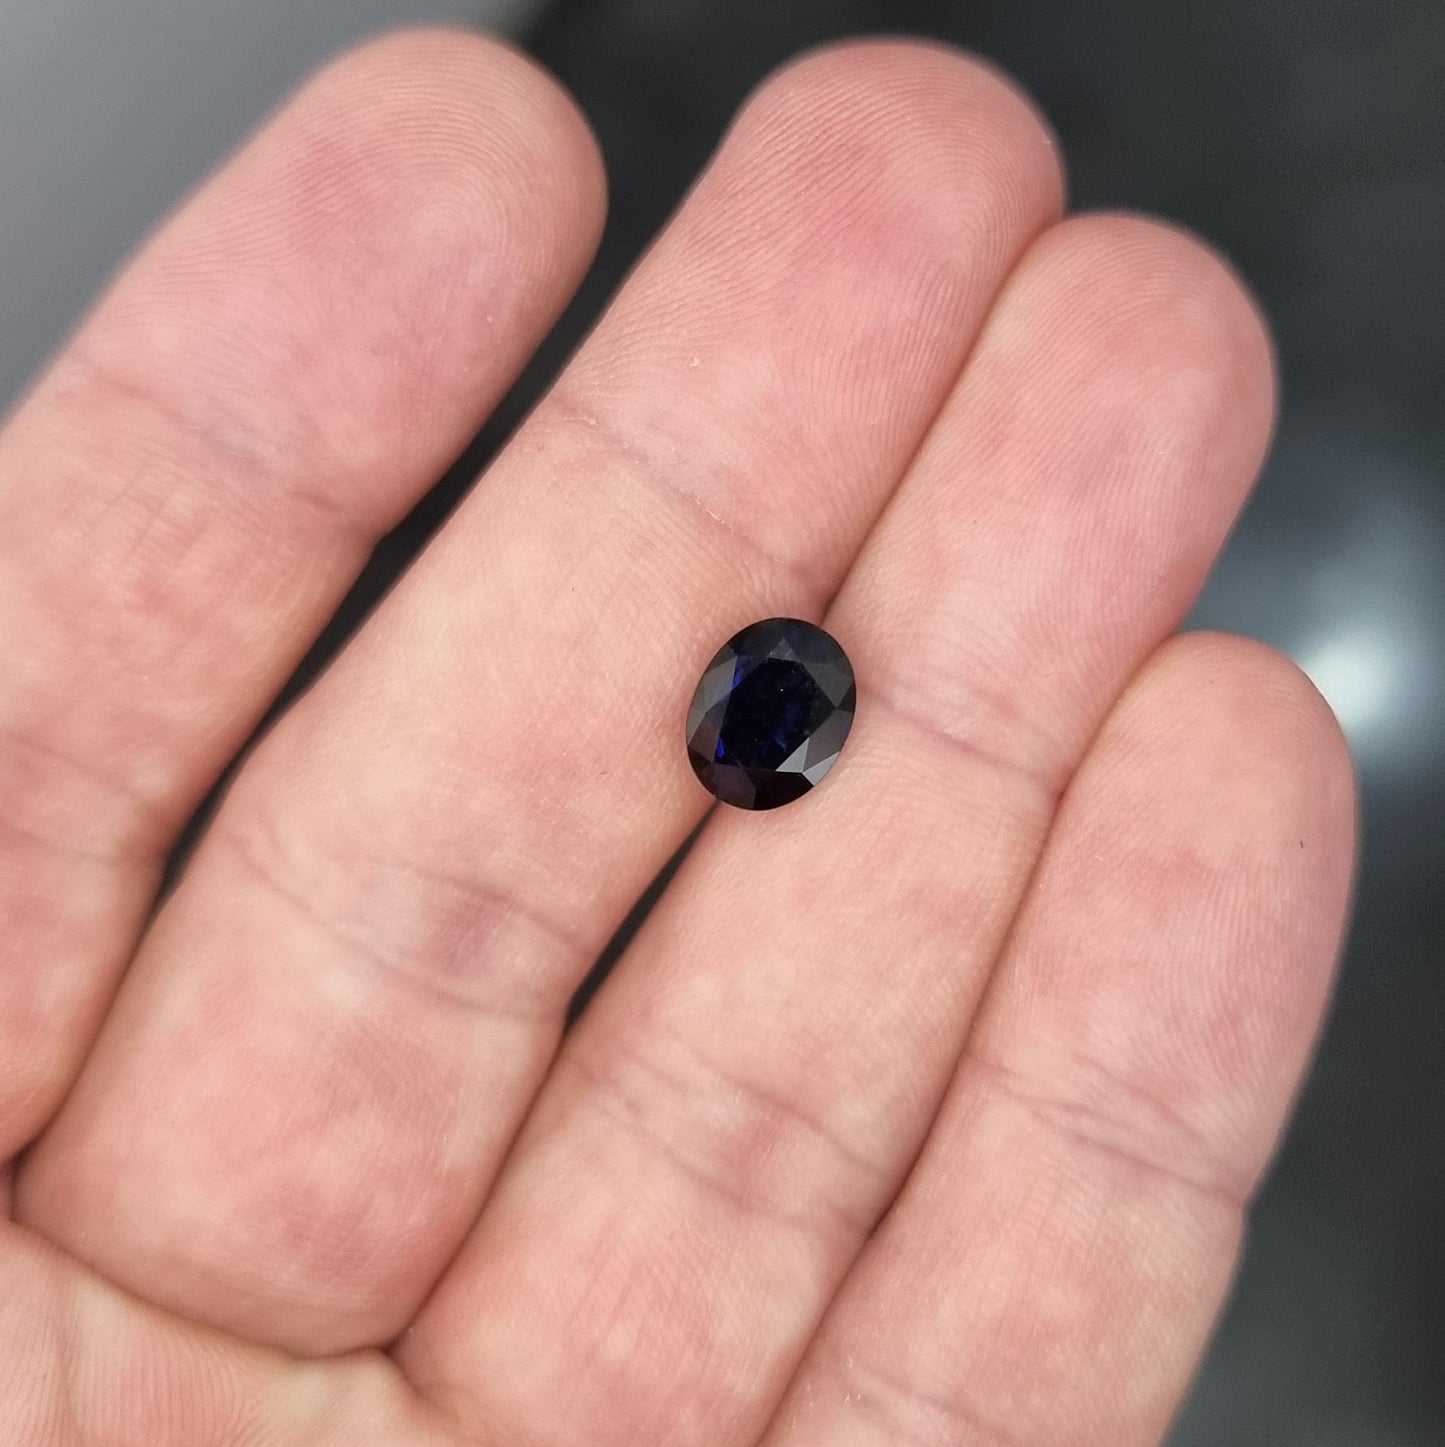 Royal Blue Pearshape Ceylon Sapphire with GFCO Certificate 4.17 CTS